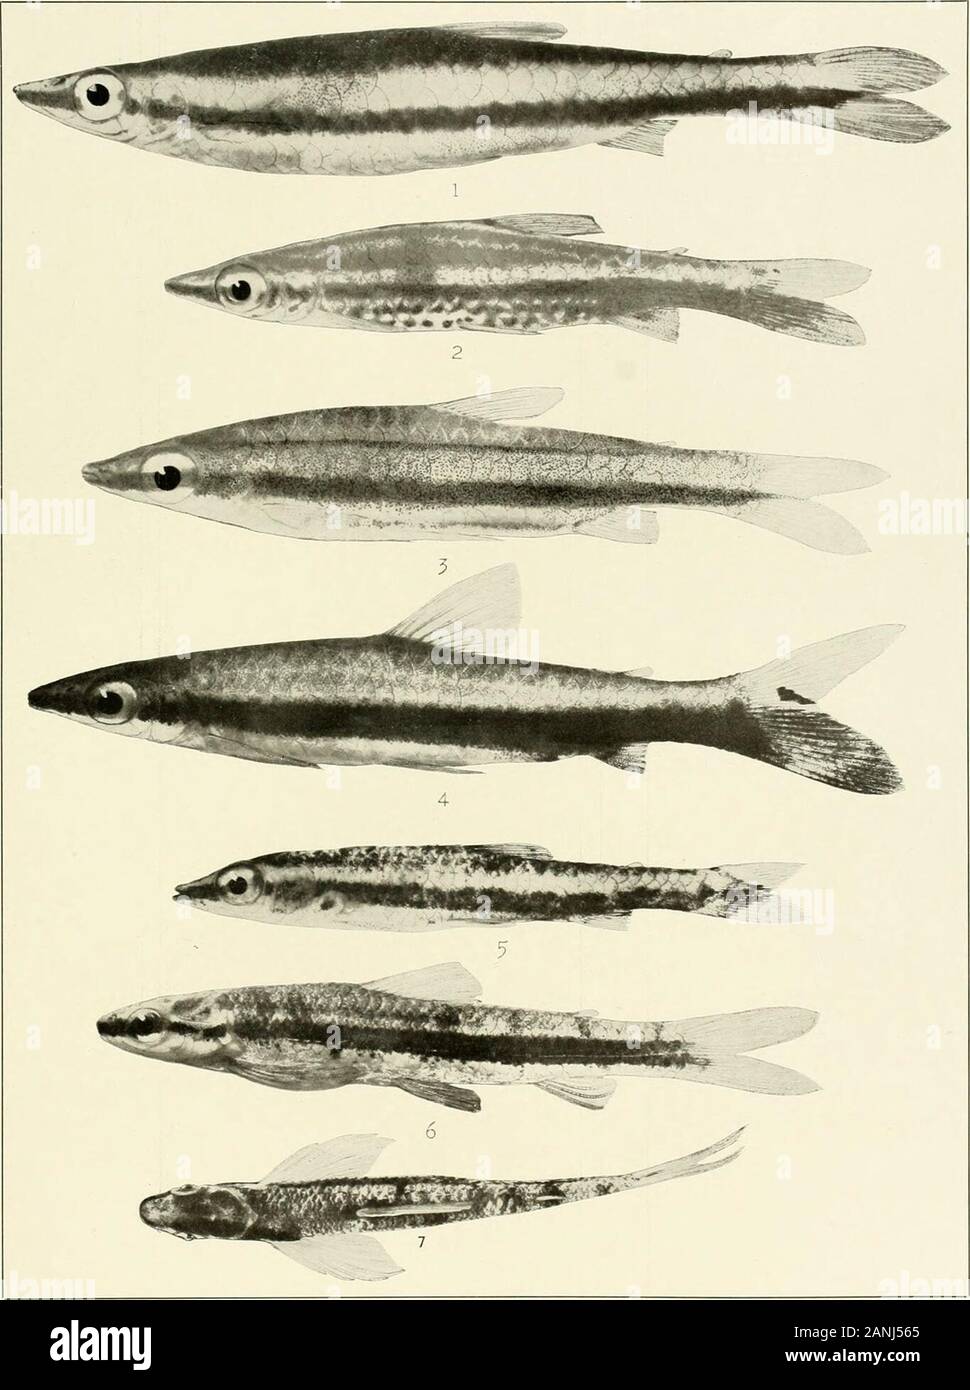 The freshwater fishes of British Guiana, including a study of the ecological grouping of species and the relation of the fauna of the plateau to that of the lowlands . 1. Parodon bifasciatus Eigenmann. (Type.) 104 mm. No. 192). 2. Hemiodus g/uadrimaculatus Pella-grin. 125 mm. No. 1930. 3. Hemiodus semitceniatus Kner. 79 mm. No. 1932. 4. Nannostomus margin- 1171. 5. Nannostomus minimus Eigenmann. (Type.) 21 mm. atus Eigenmann. (Type.) 26 mm. No.No. 1165. 6. Nannostomus simplex Eigenmann. (Type.) 25 mm. No. 1167 [emoirs Carnegie Museum, Vol. V. Plate XXXVII. 1. Pcecilobrycon harrisoni Eigenmann. Stock Photo